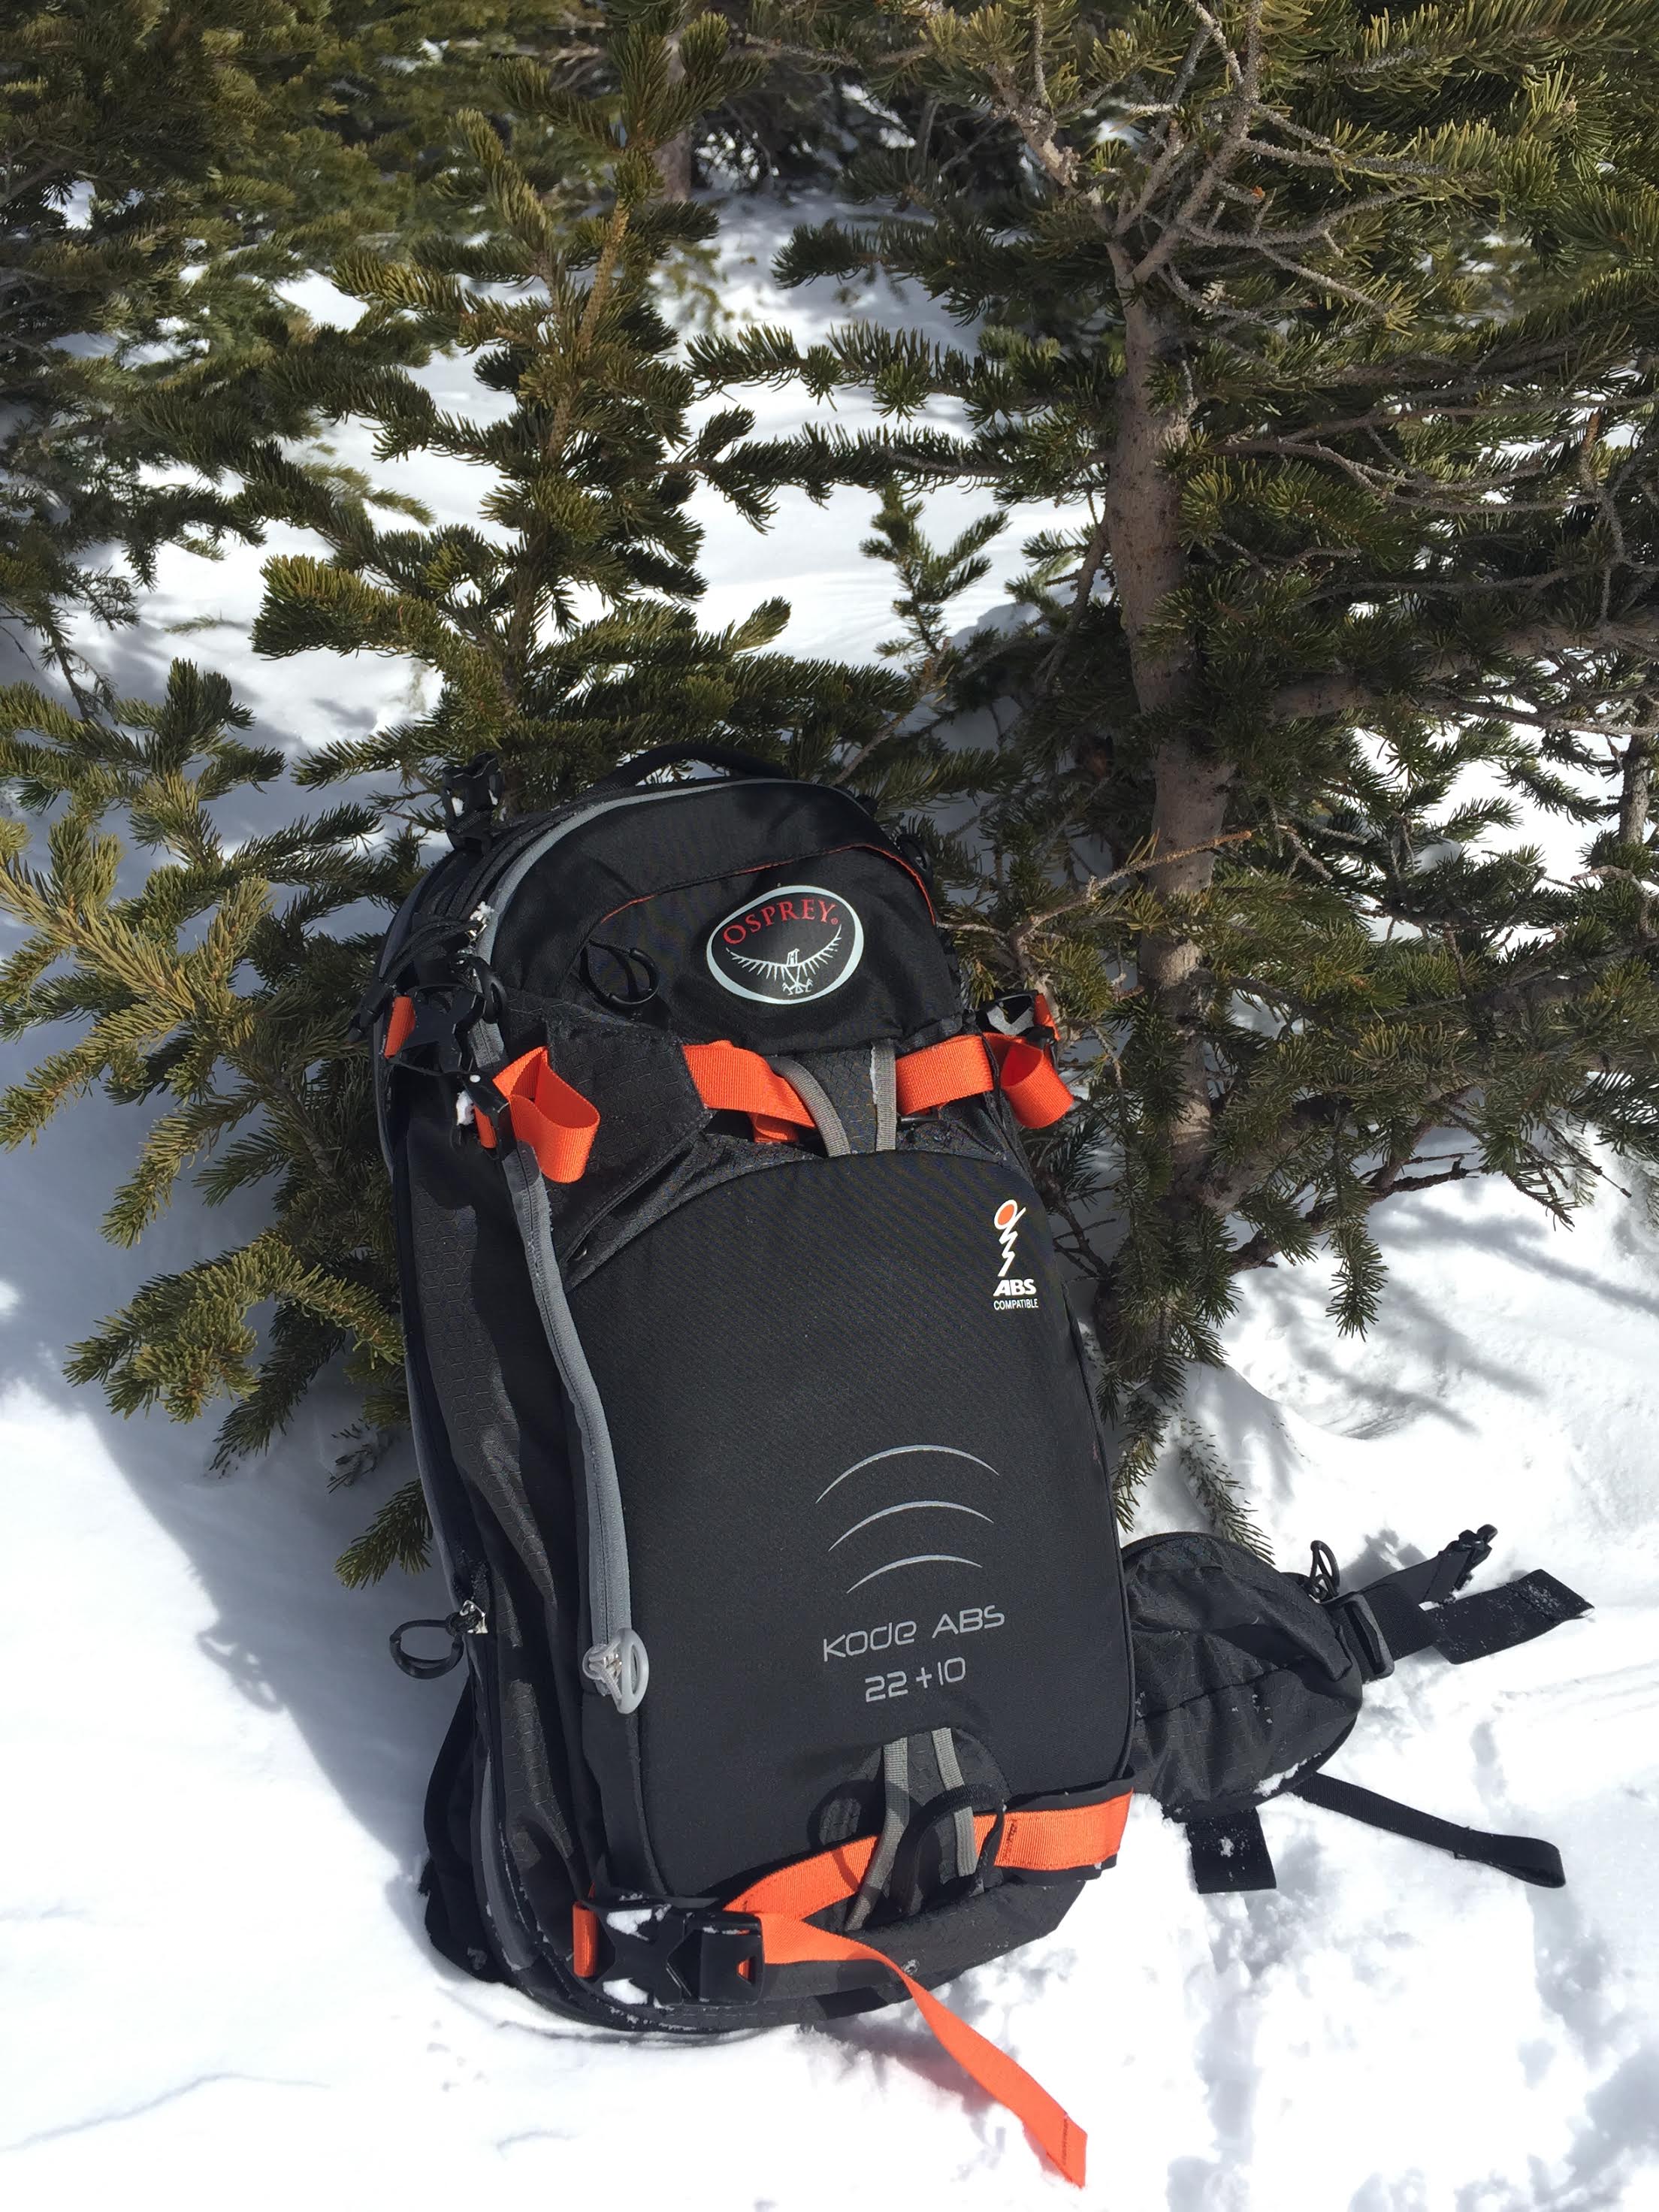 ProView - Osprey Kode 22 +10 ABS - The Link - Gear Reviews